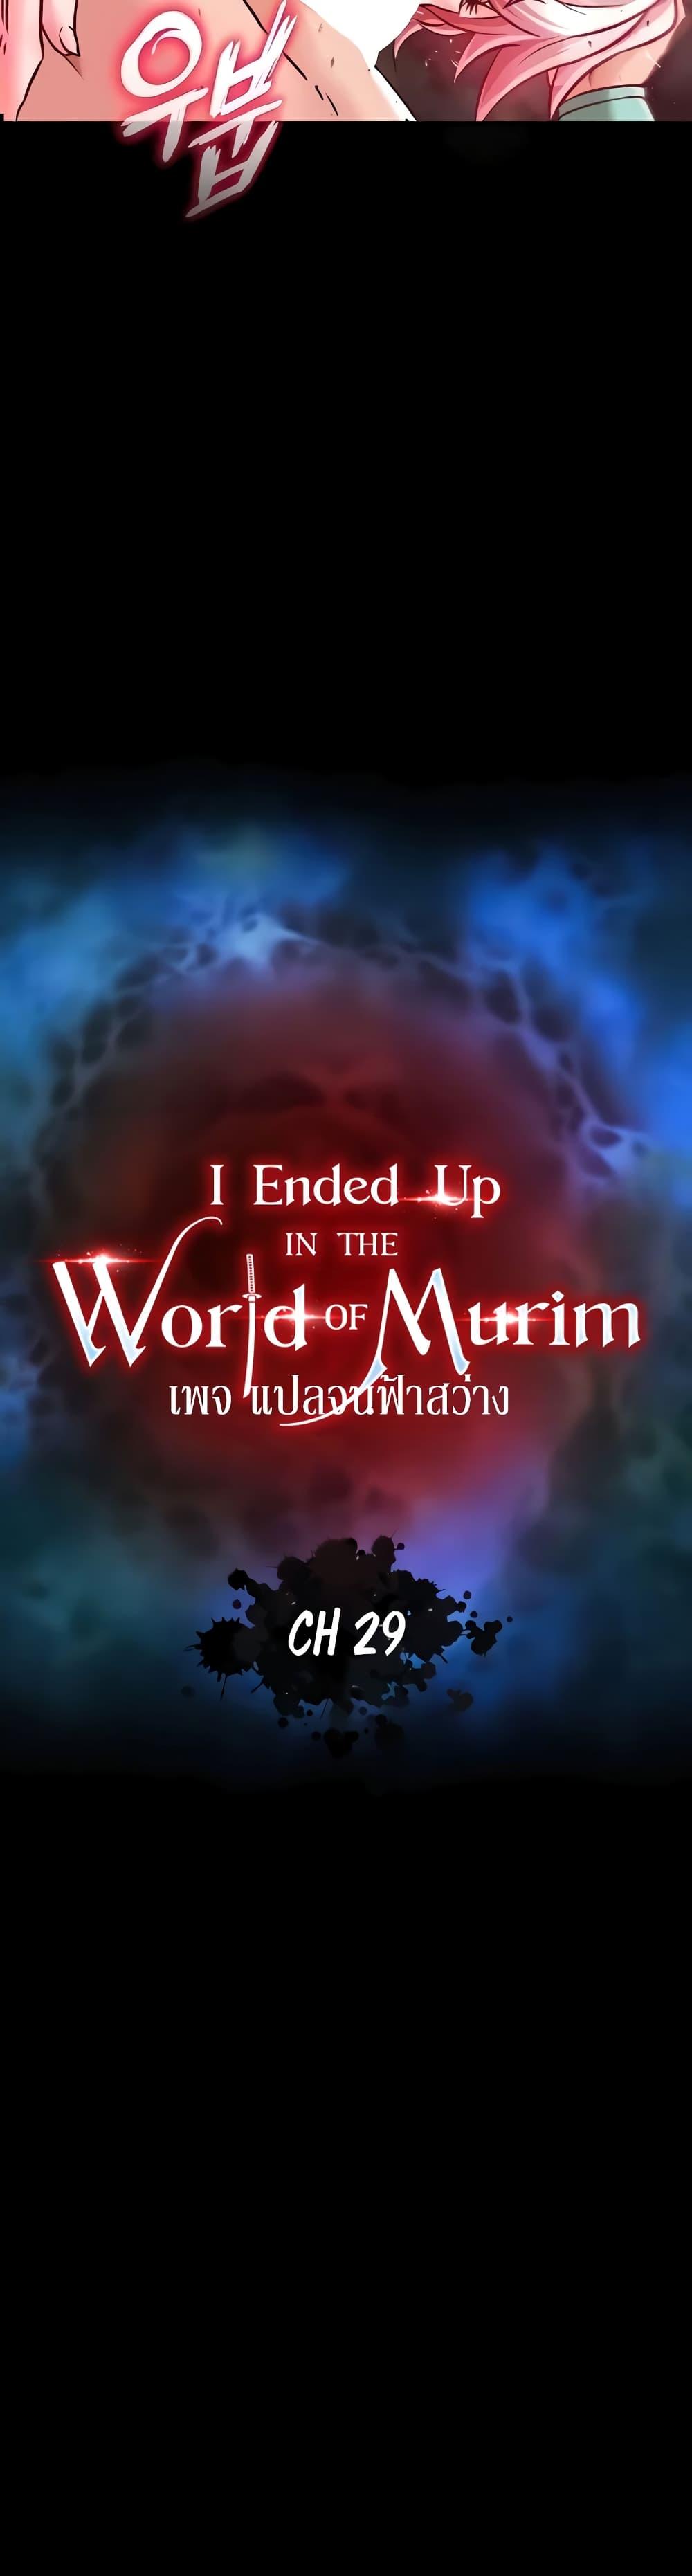 I Ended Up in the World of Murim 29 04